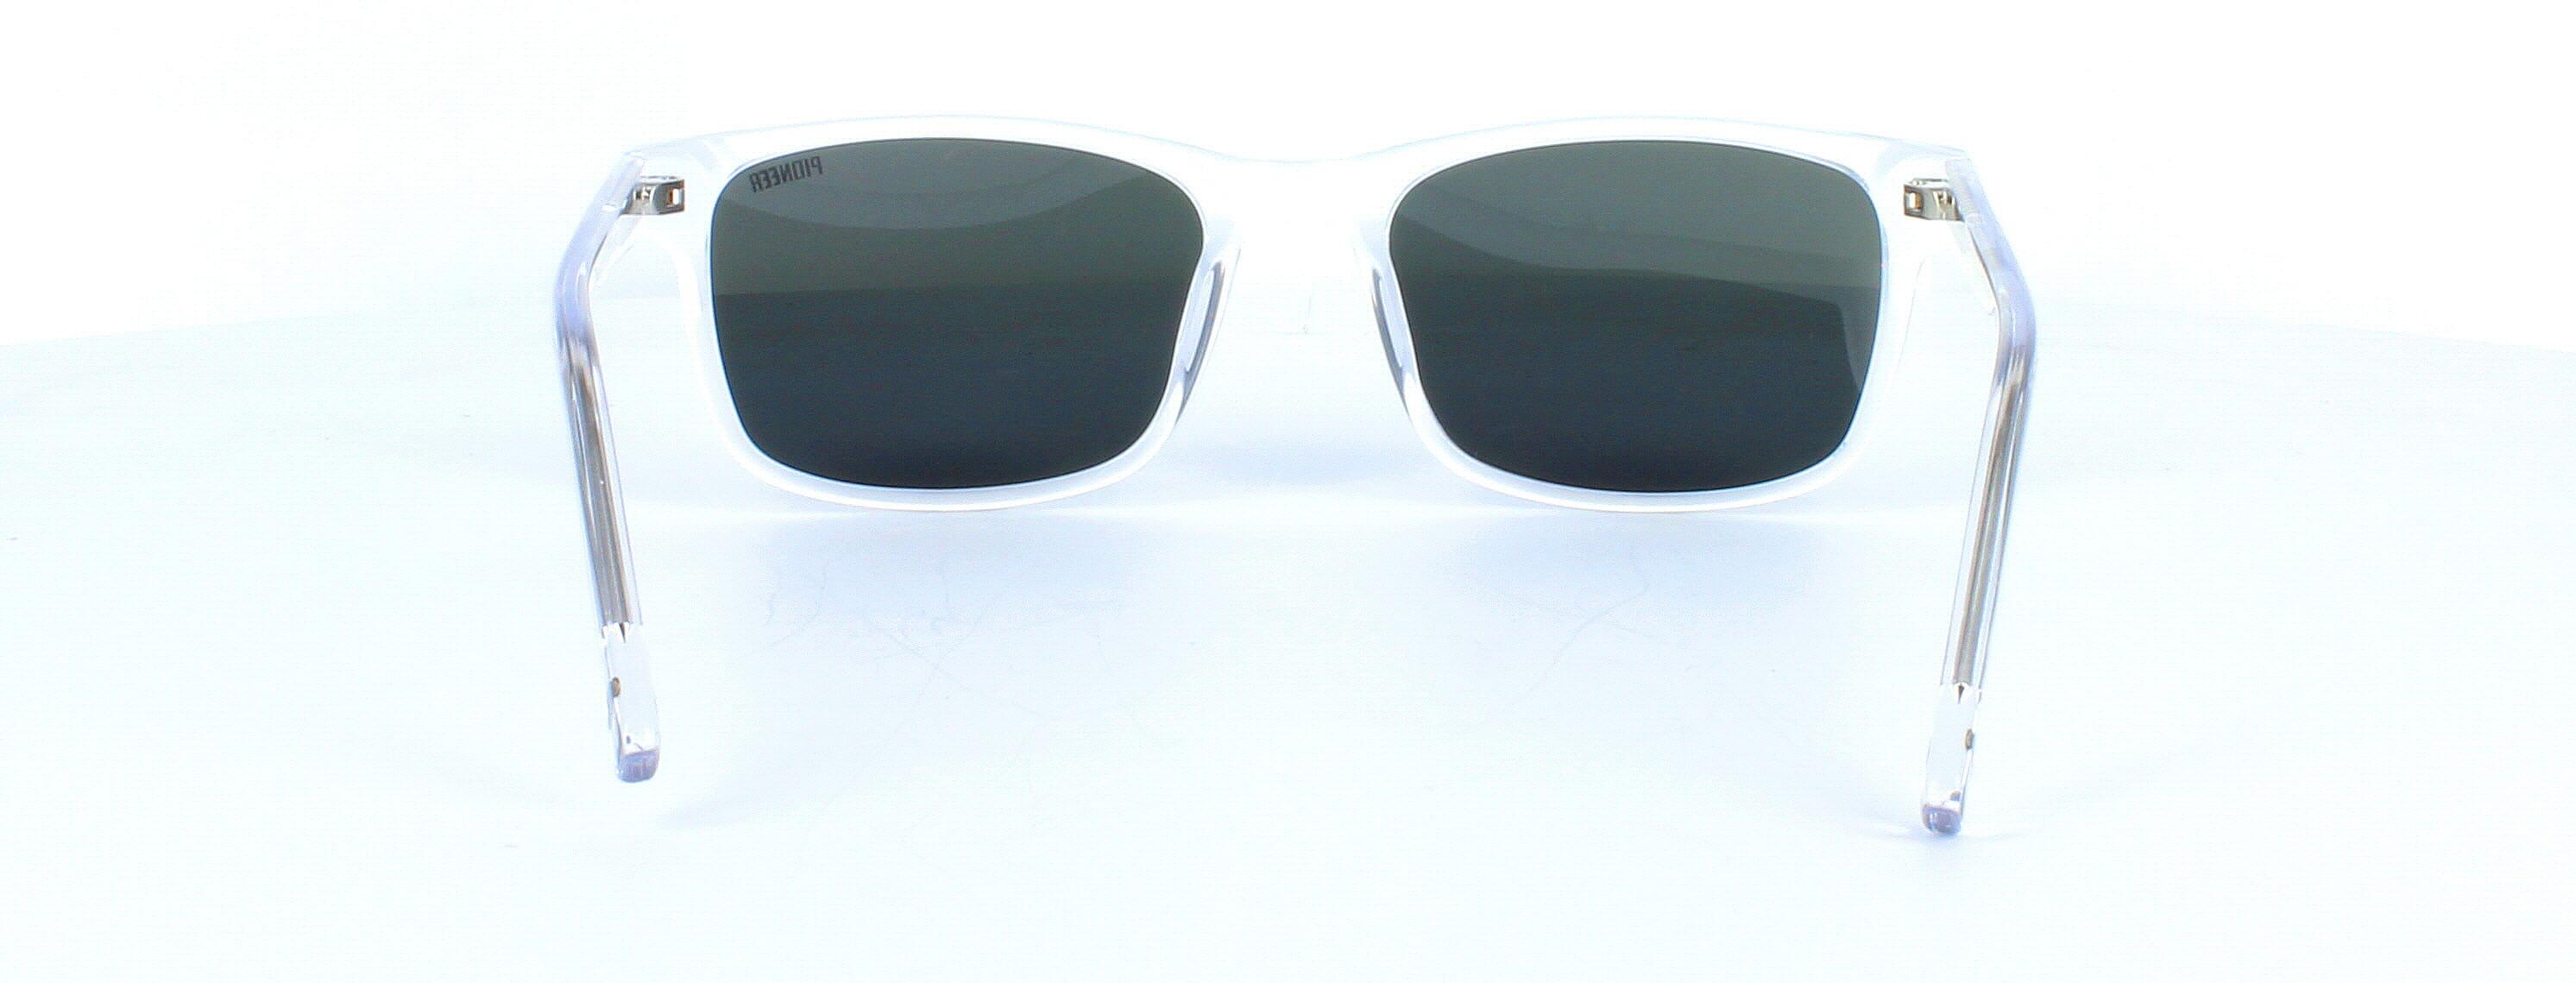 Rocco - clear crystal unisex sunglasses - image view 3